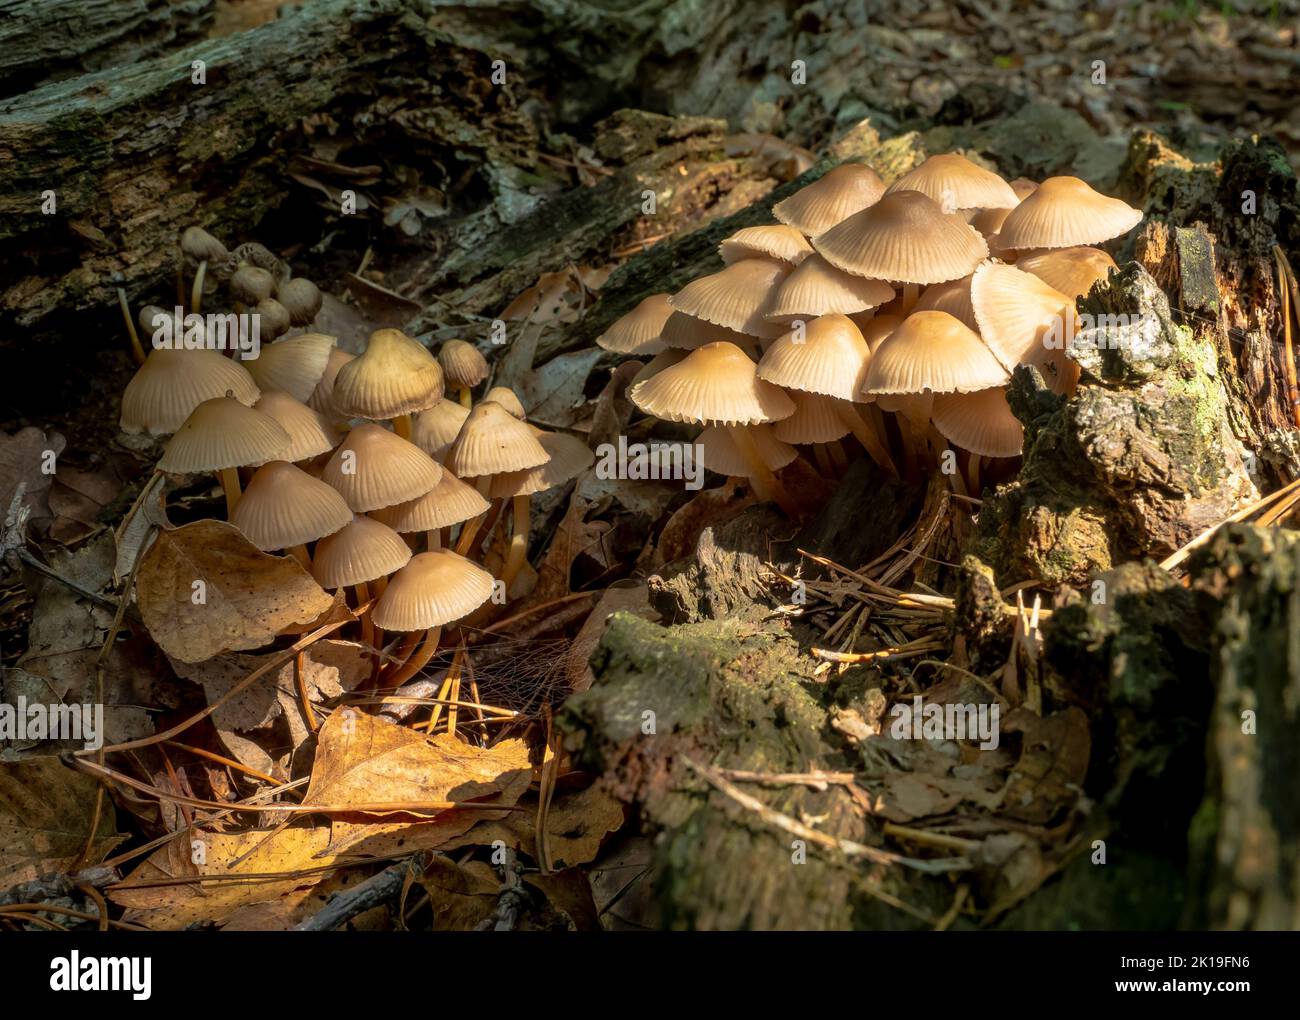 Wild mushroom at big rotten trunk tree that fell down in the deep forest. Parasite mushroom growth on tree. Stock Photo